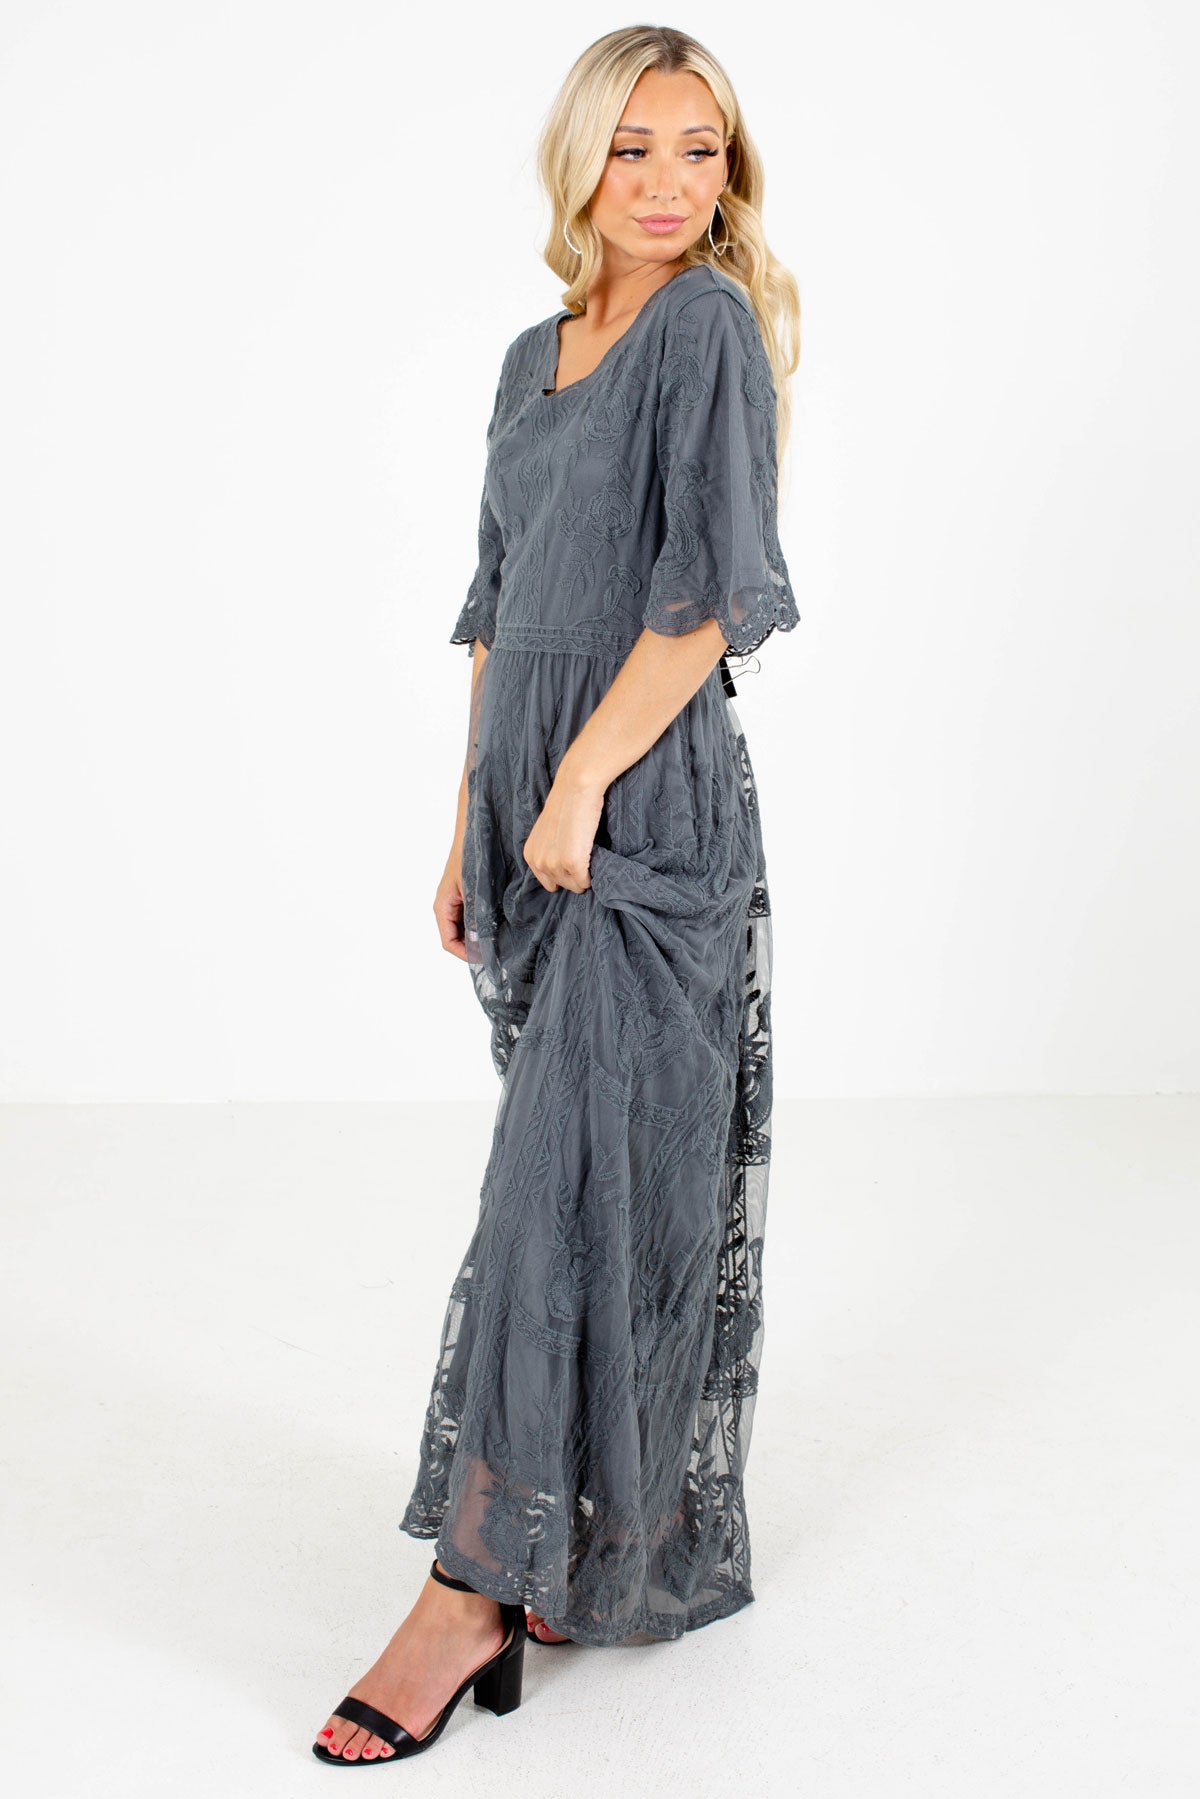 Gray Scalloped Short Sleeve Boutique Maxi Dresses for Women